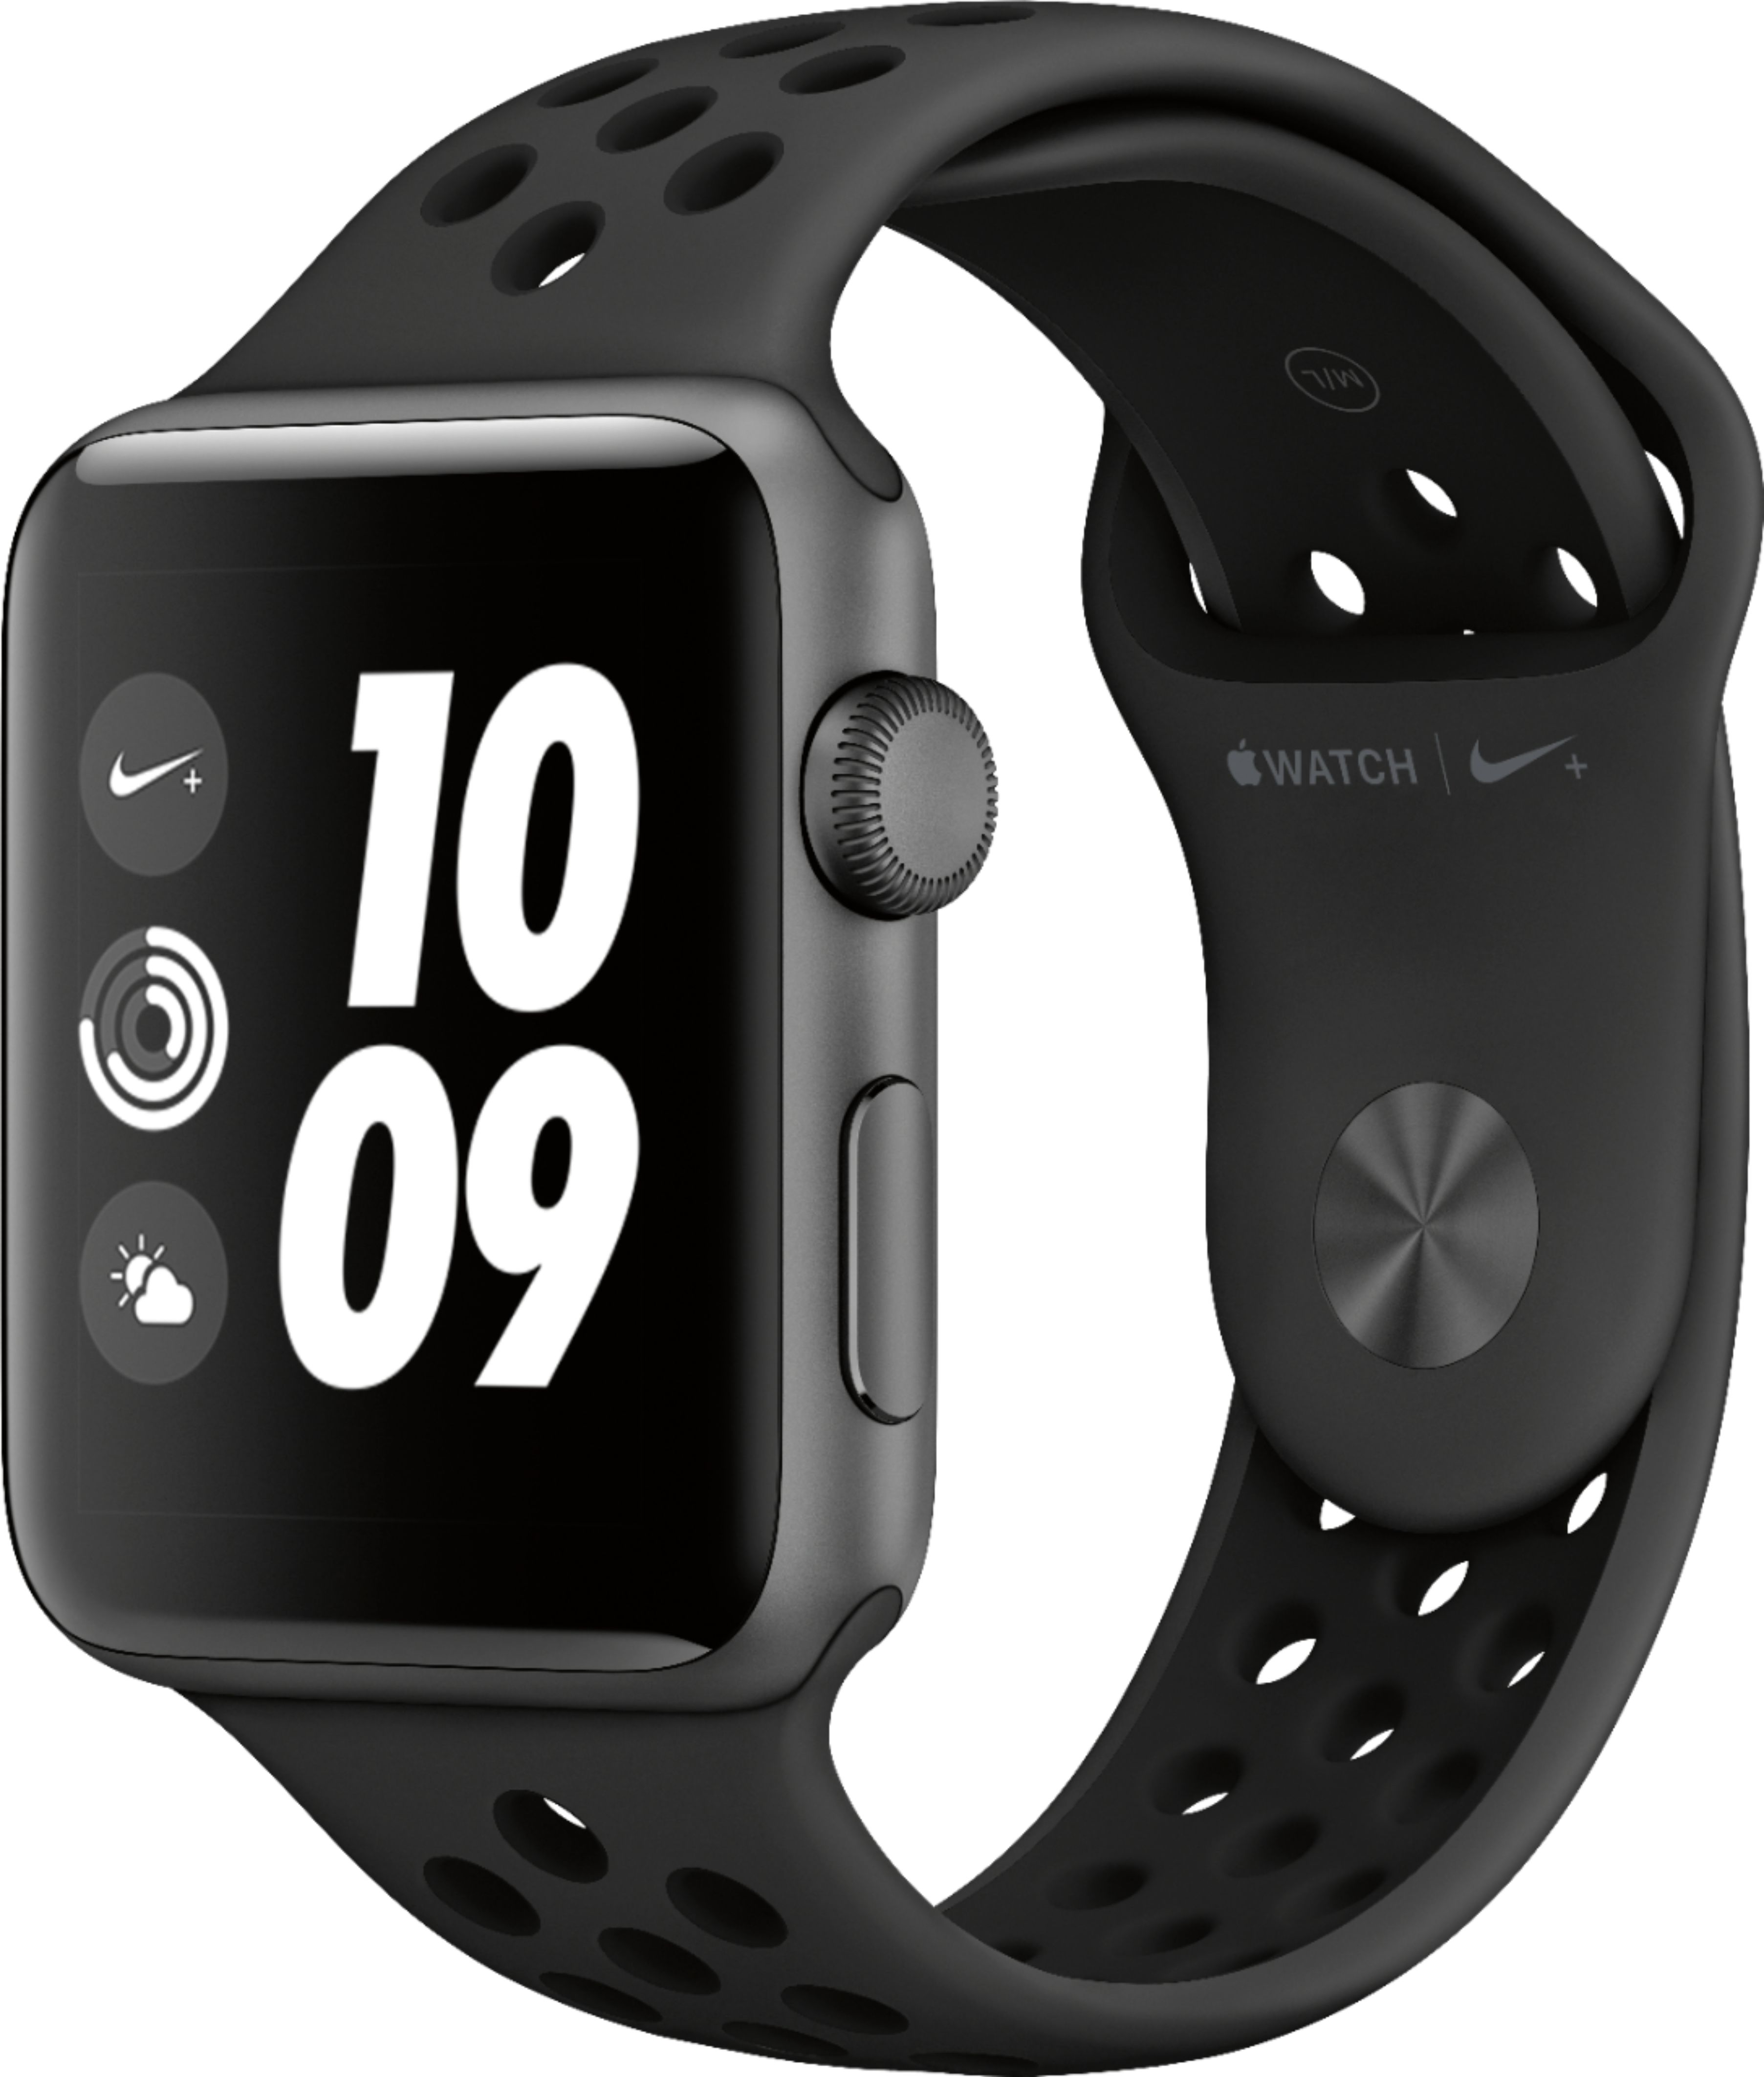 GSRF Apple Watch Nike+ Series 3 (GPS) 42mm Space Gray Aluminum Case with Nike Sport Band - Space Gray Aluminum